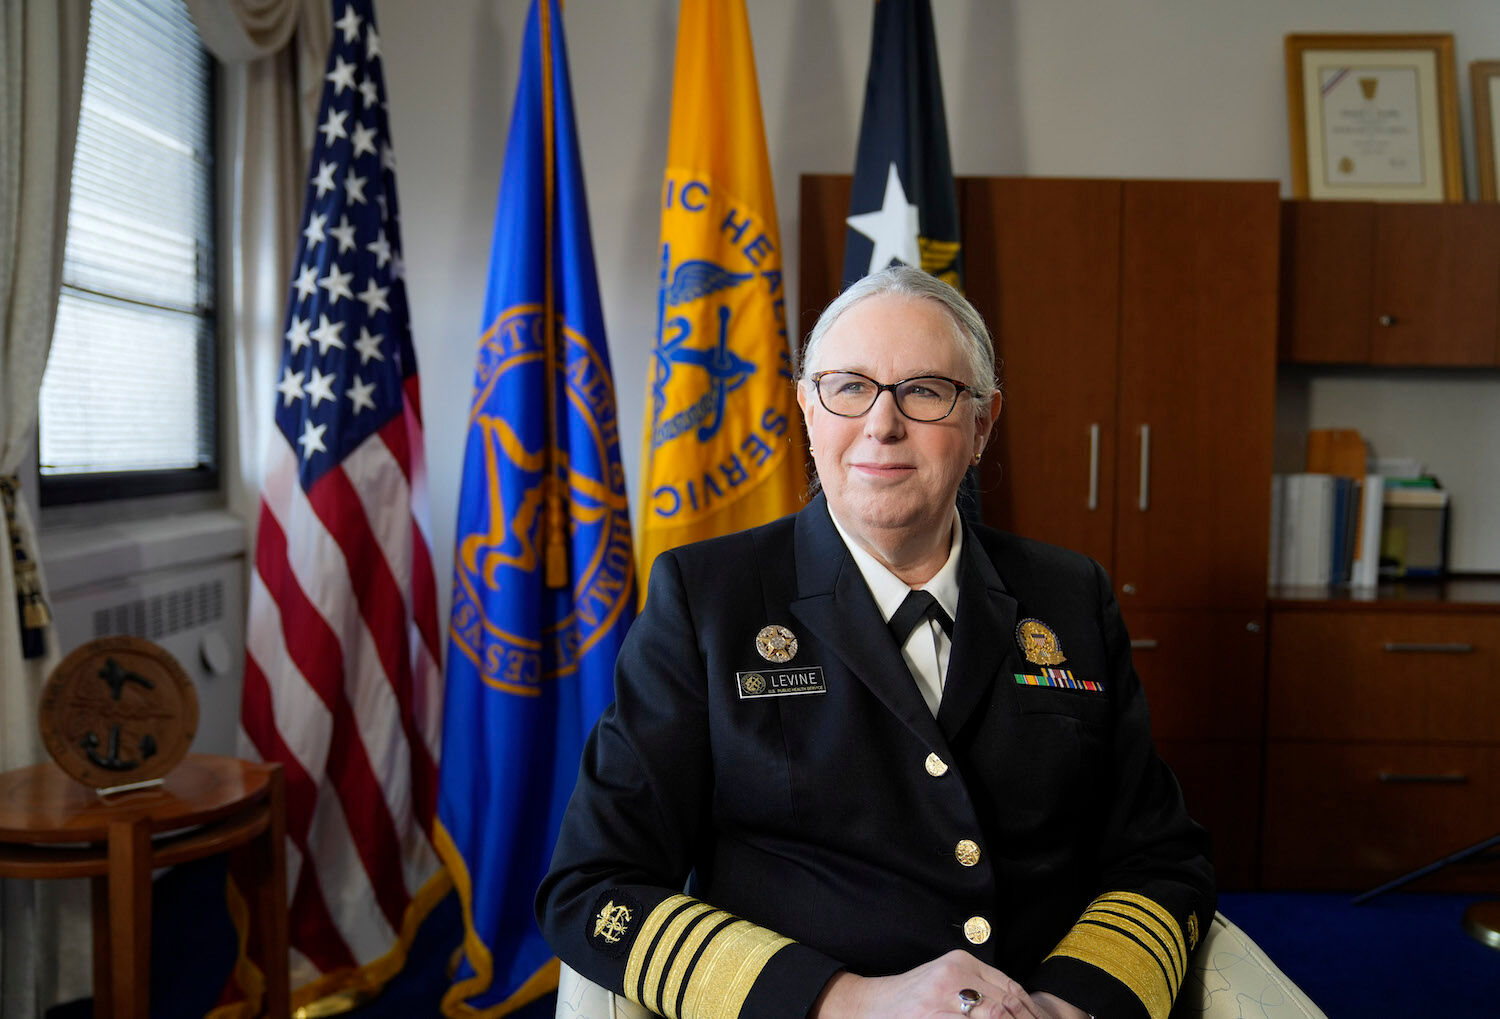 Feb 16, 2022; Washington, DC, USA; USA TODAY Women of the Year honoree Admiral Rachel Levine at the Department of Health and Human Services in Washington. Admiral Levine serves as the assistant secretary of health at the Department of Health and Human Services.. Mandatory Credit: Jarrad Henderson-USA TODAY